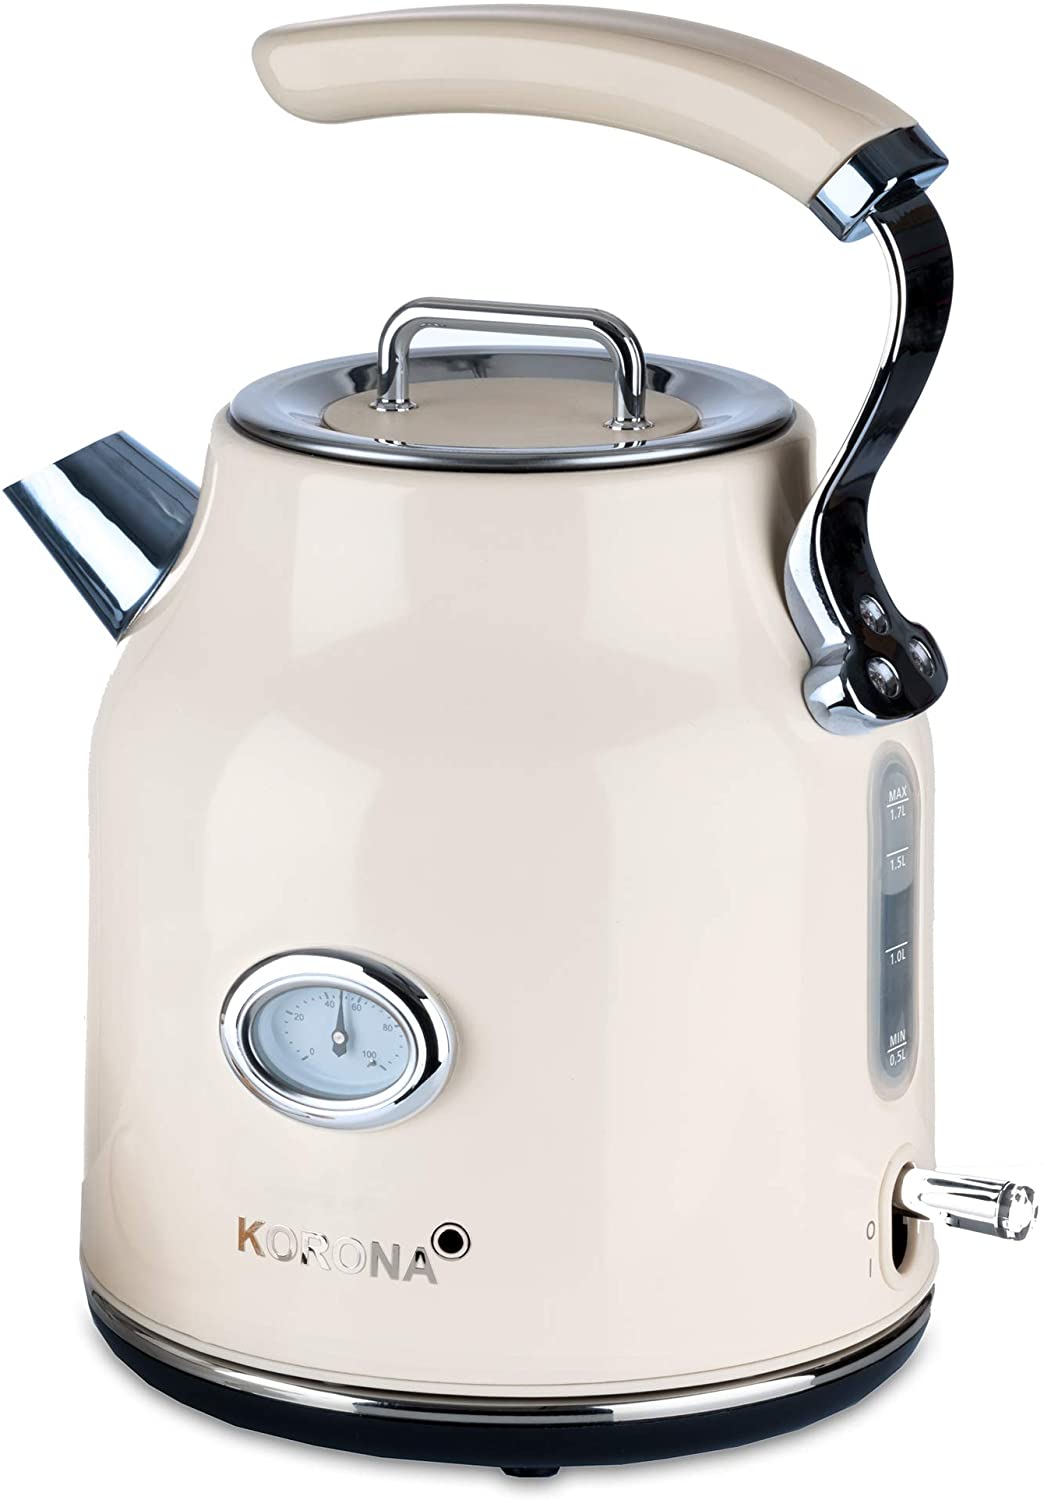 Korona Electric Kettle, Cream, 1.7 Litres, 2200 Watt, Limescale Filter, Steam Stop, Dry Protection, Hot Water, Tea and Coffee, 20666